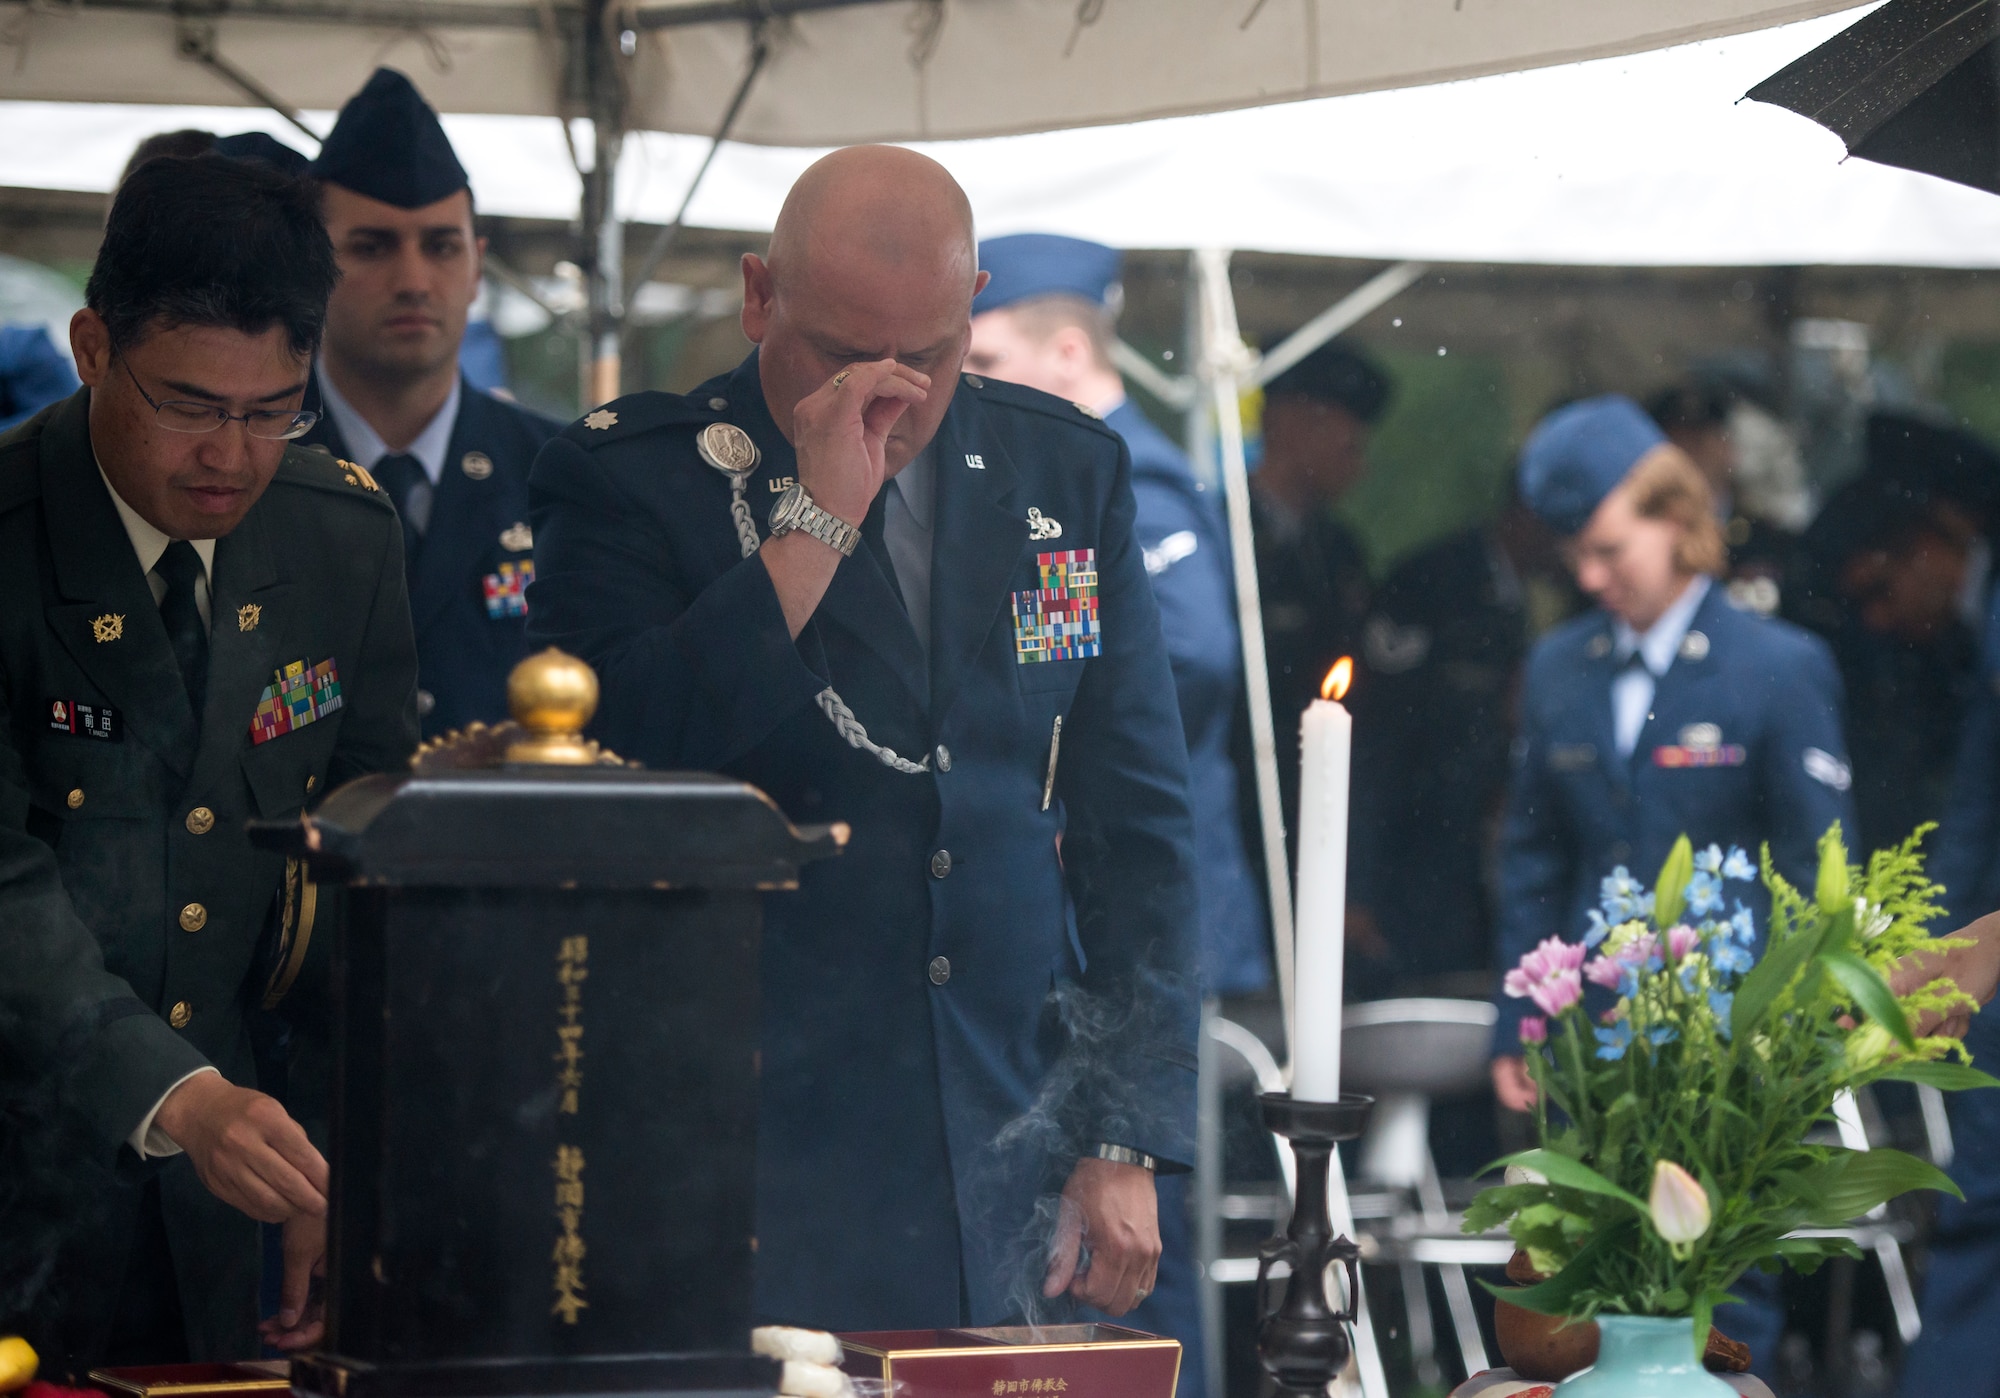 U.S. Air Force Lt. Col. William Villegas, 5th Air Force deputy director, participates in an incense ceremony